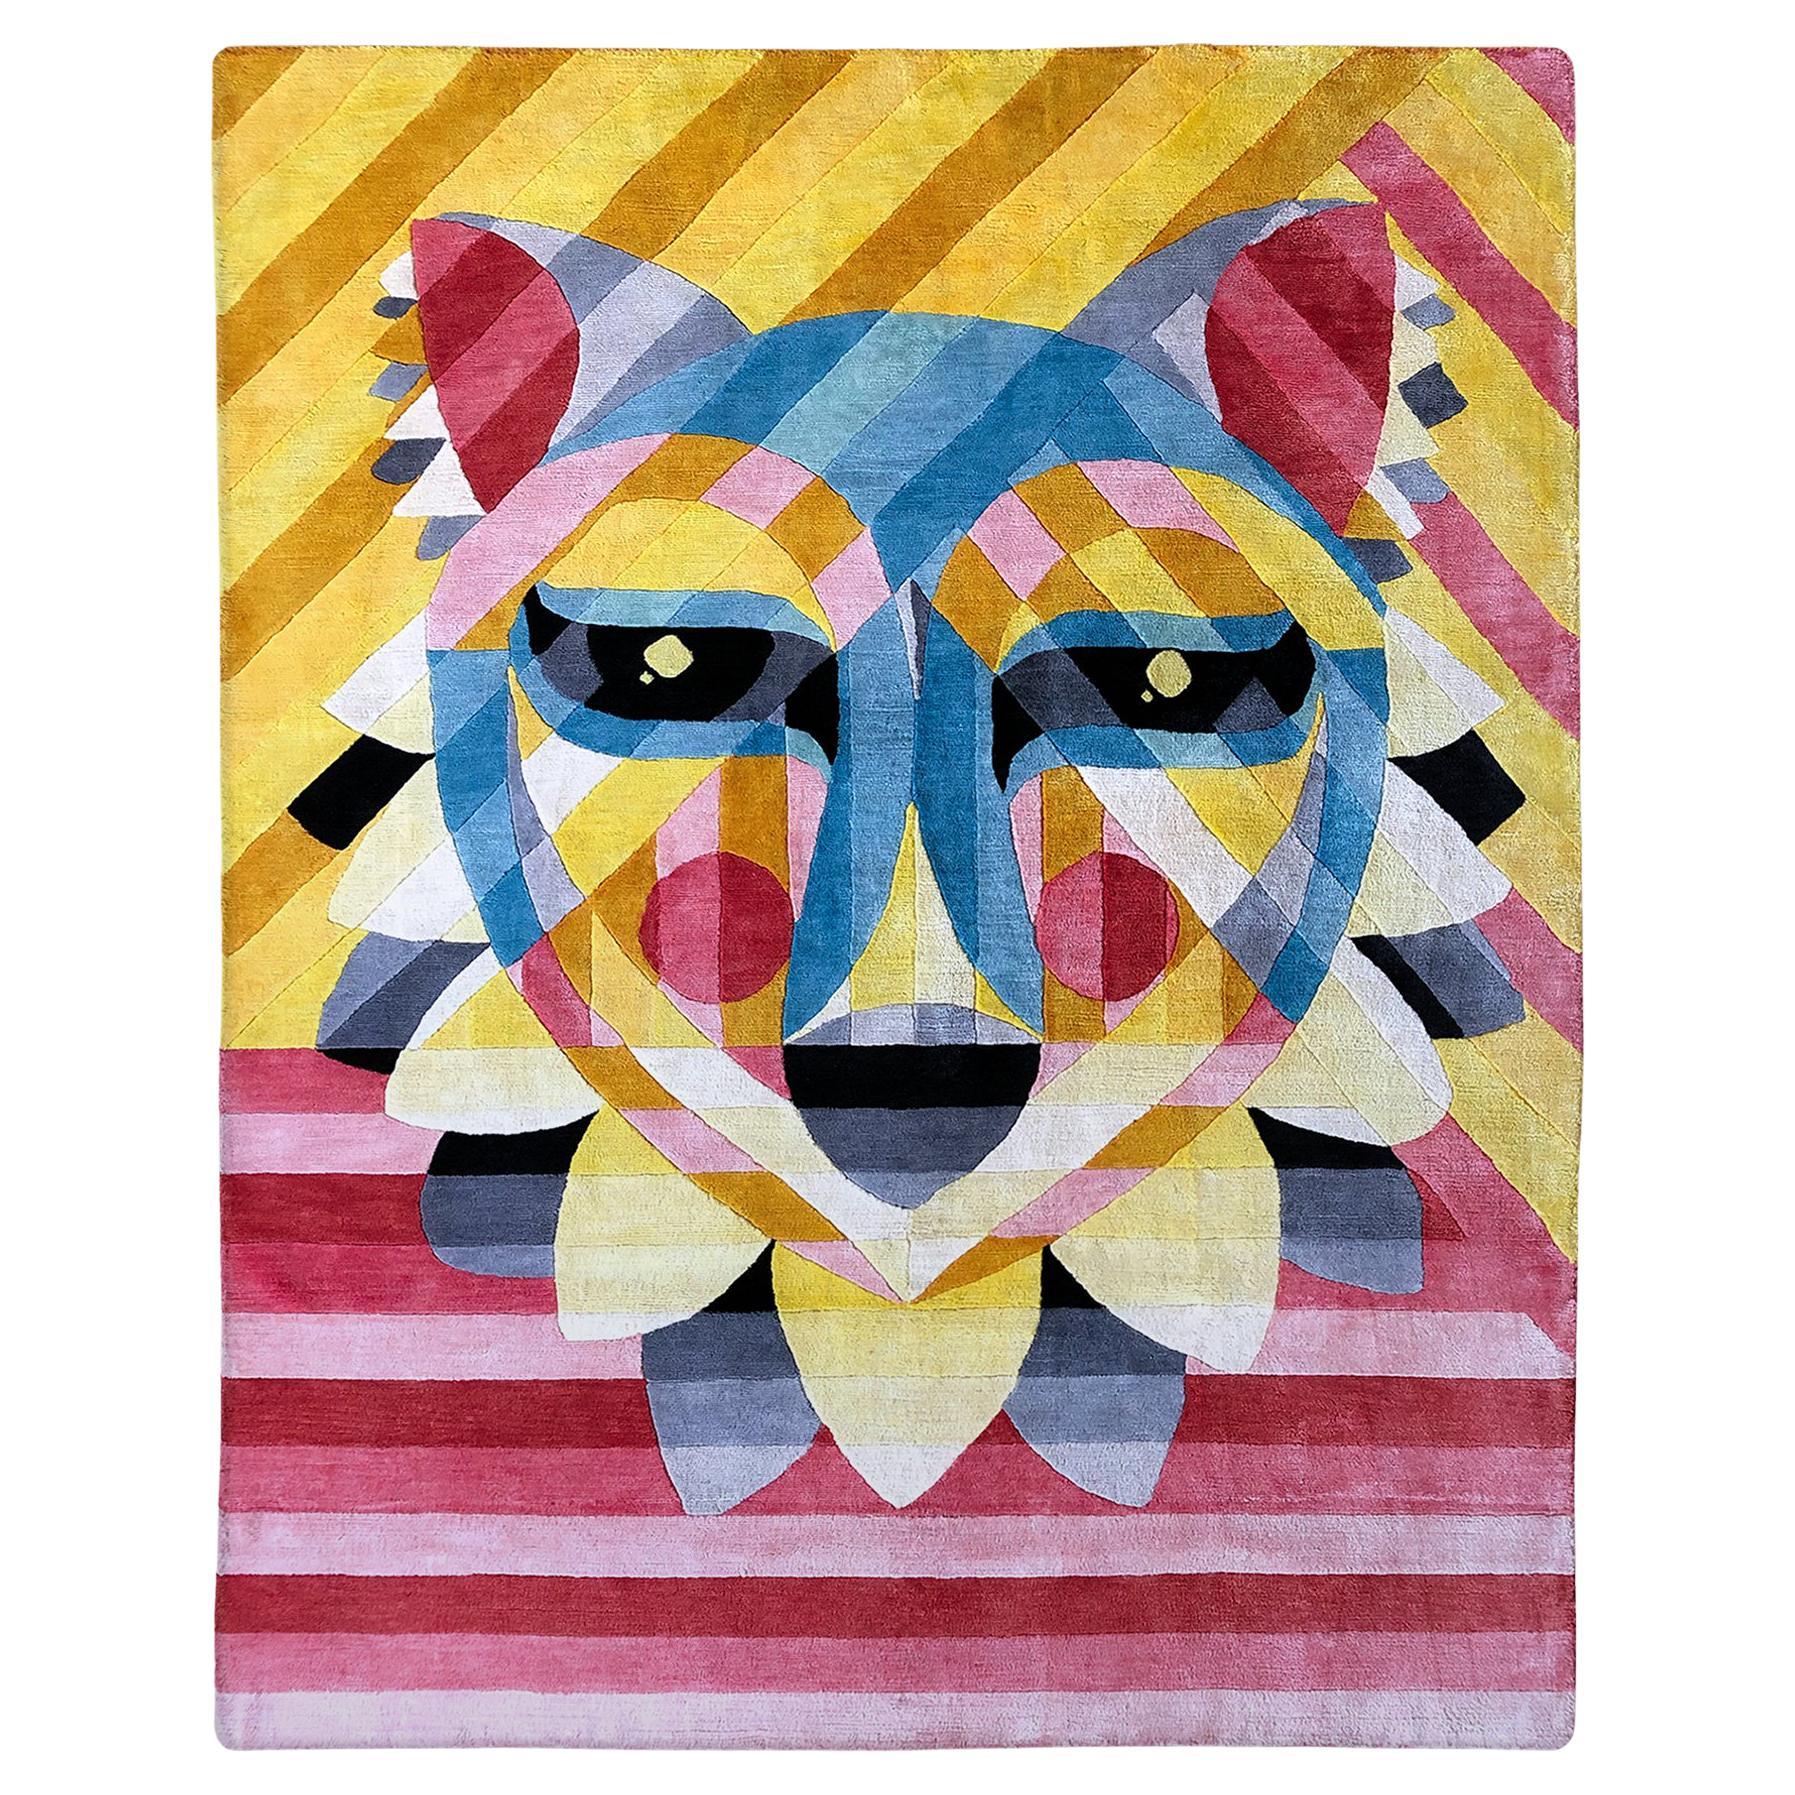 Desert Fox Rug by Ruben Sanchez, Hand Knotted, 100% New Zealand Wool 300x375cm For Sale